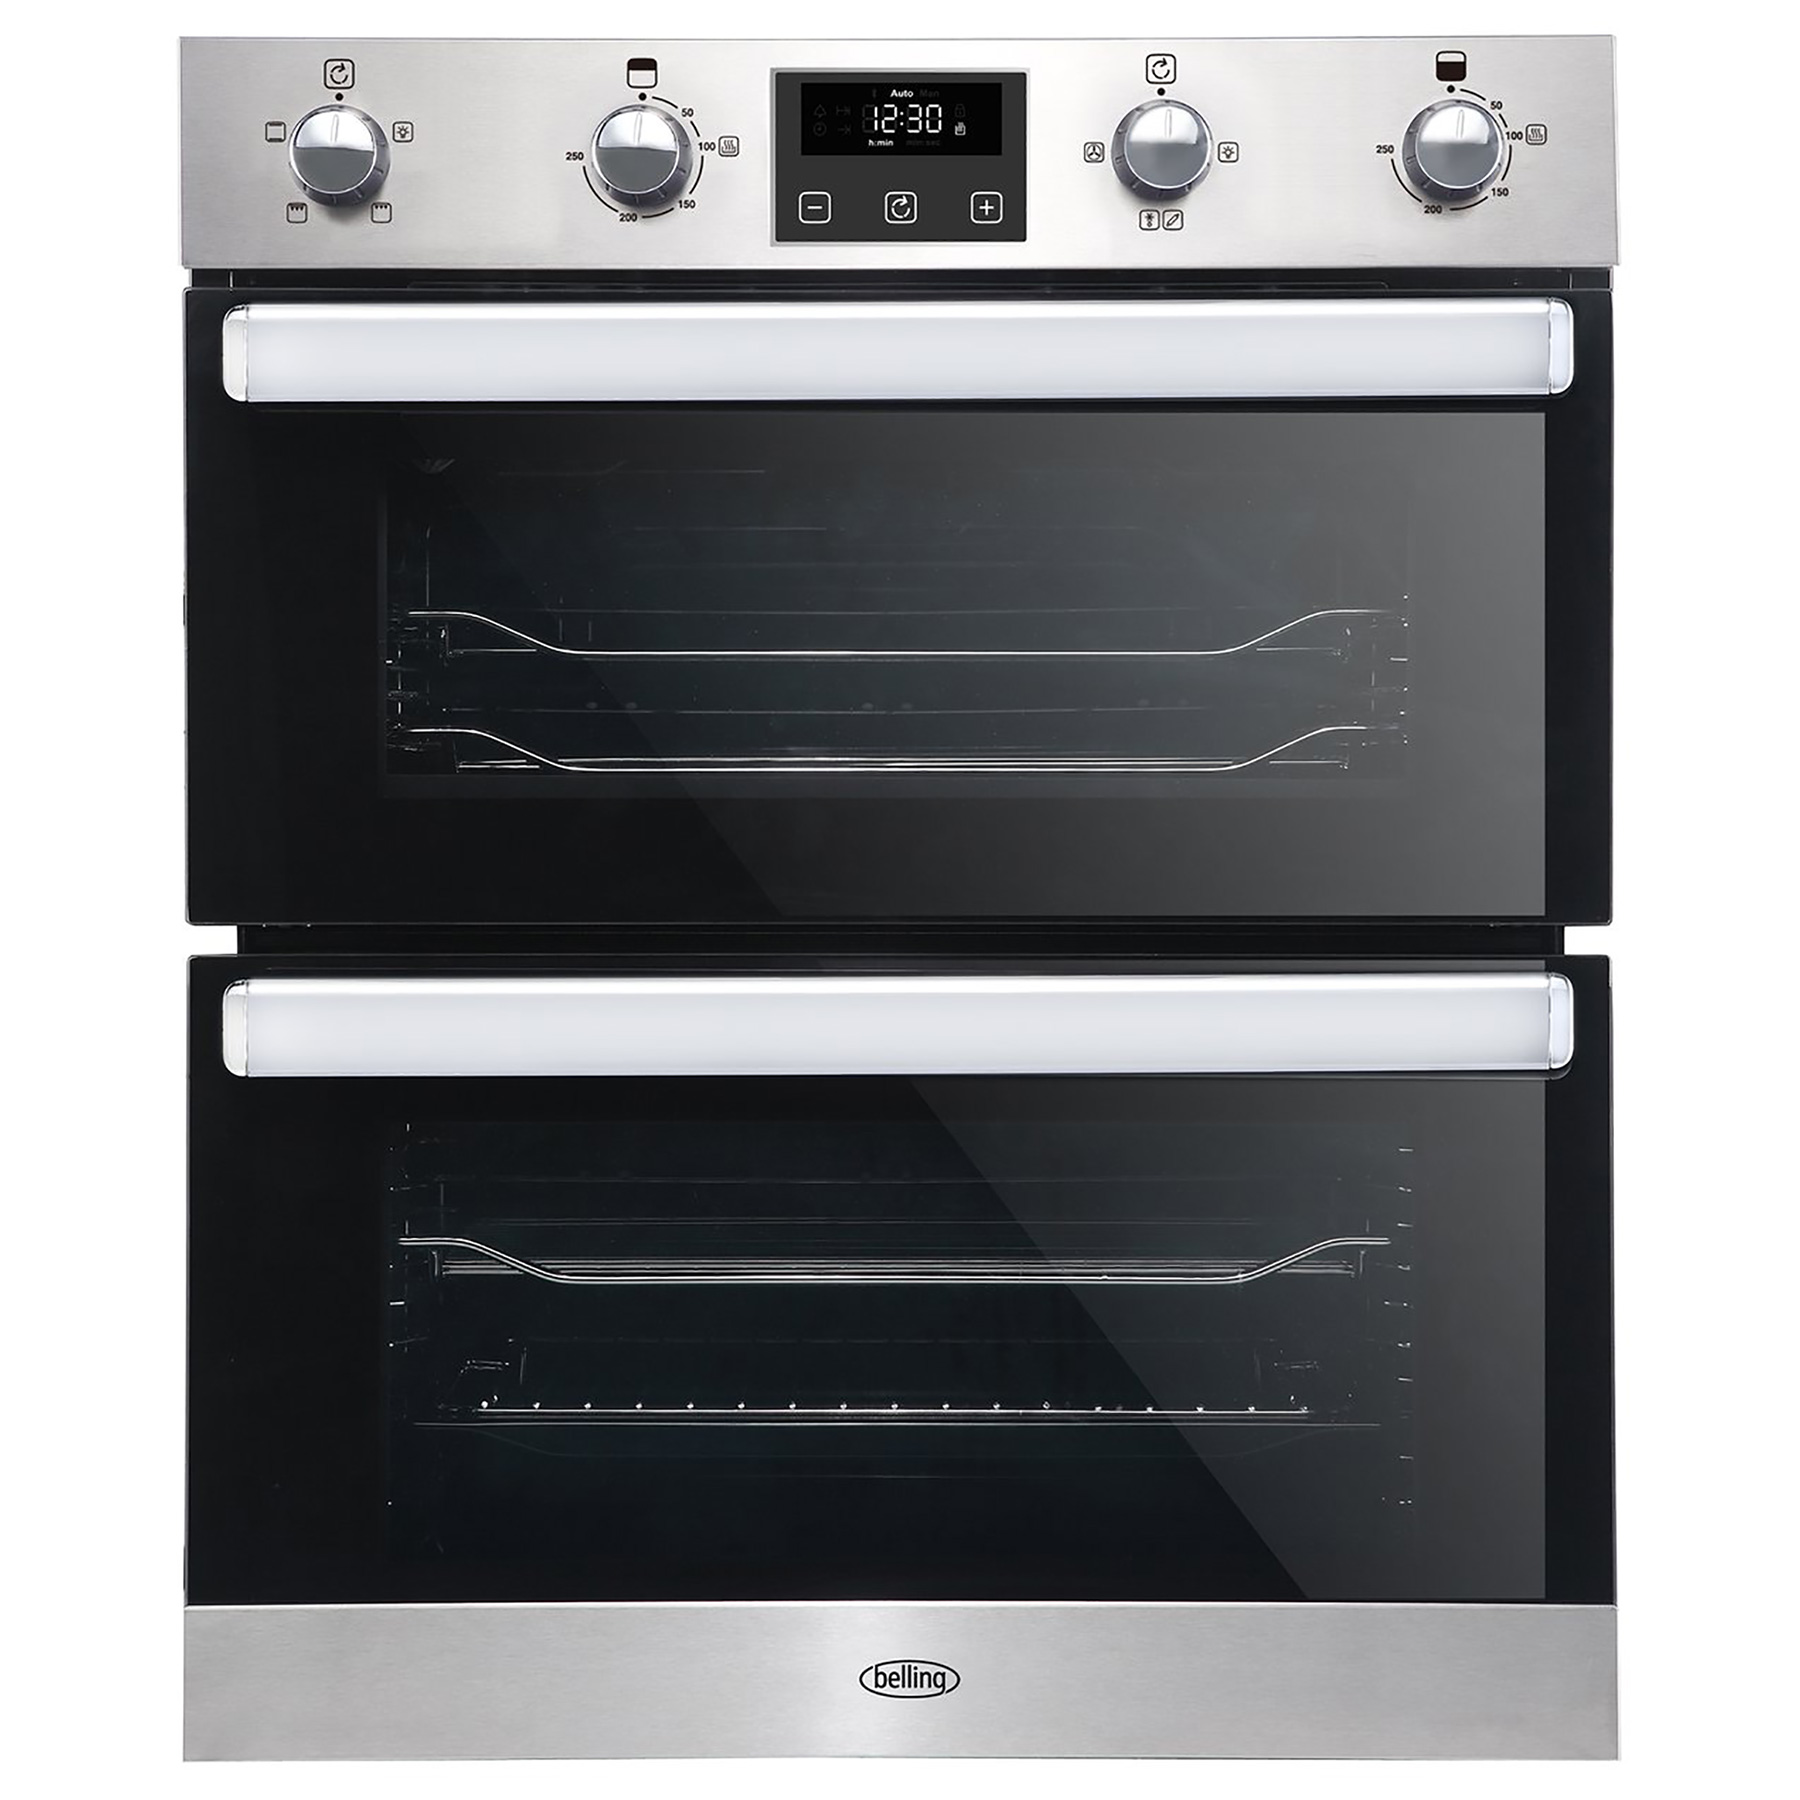 Belling 444444781 70cm Built Under Electric Double Oven Stainless Stee